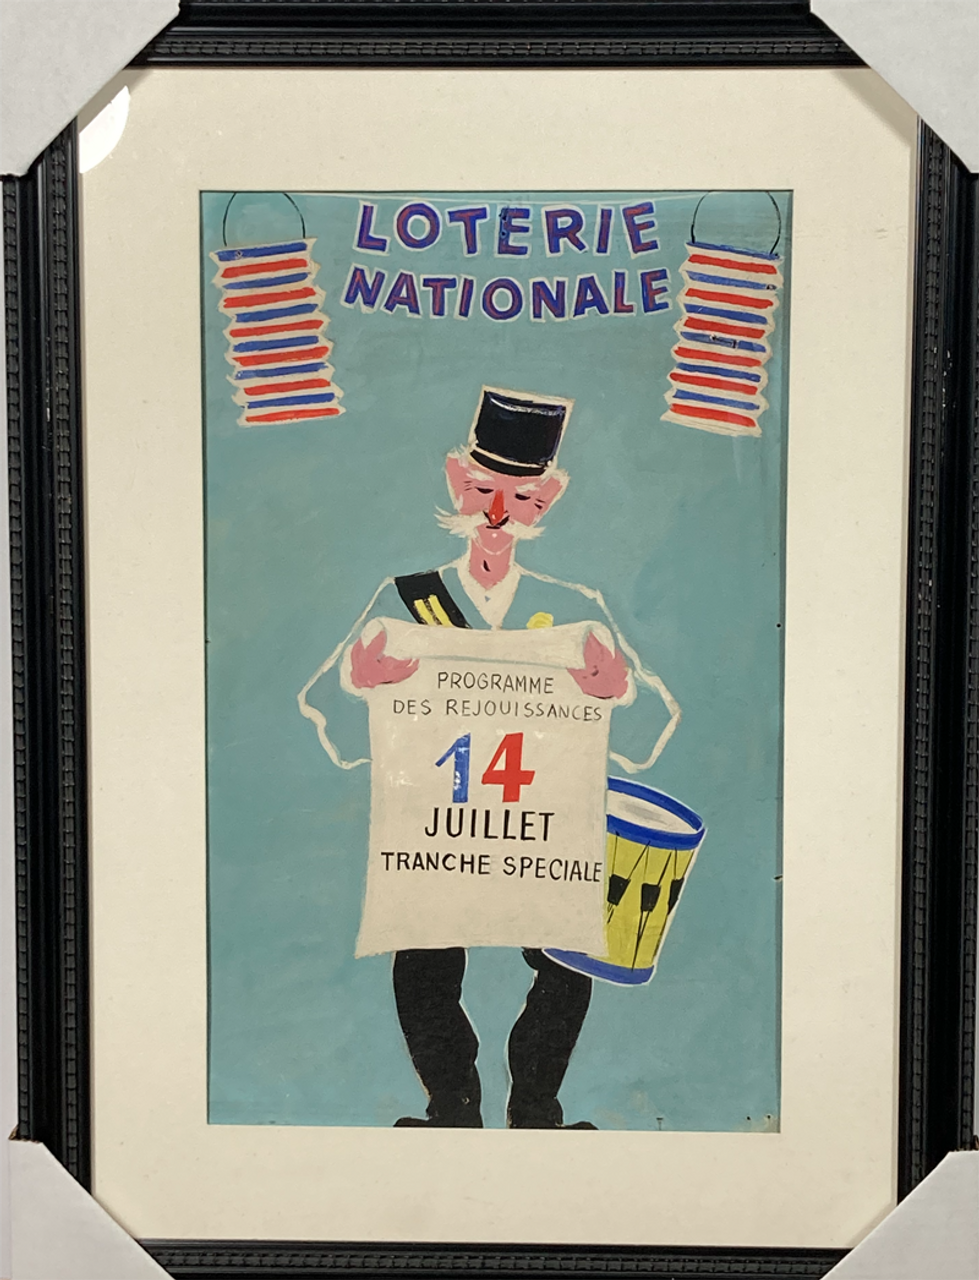 Original maquette advertising National Lottery one of a kind July 14 Bastille Day